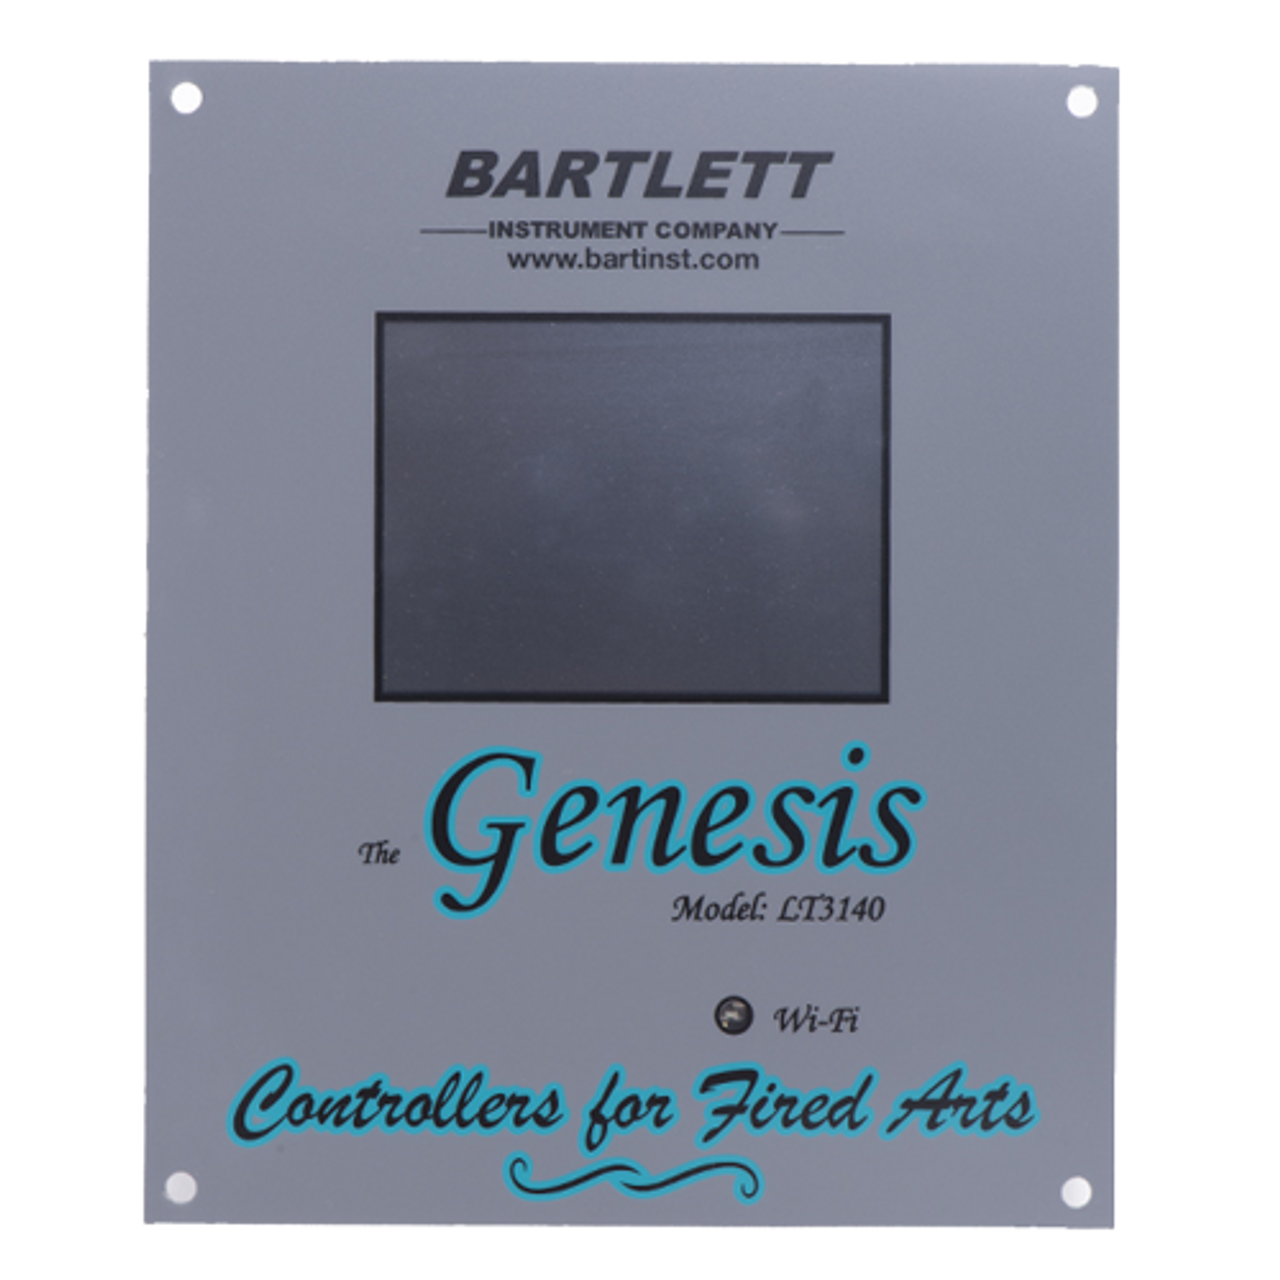 The Bartlett Genesis is the next generation of kiln controllers.  It has a modern, intuitive user platform, and touch screen display.  The Genesis has different user-interface levels to match the firing knowledge of the user, and a graphical display of the firing’s progress.  It is capable of storing up to 12 custom programs with up to 32 segments each, or you can simply fire by cone number and speed.  This unit is Wifi enabled.  Soon users will be able to register their units with the manufacturer’s website.  This will allow you to download software updates to your laptop, and in turn upload those updates to the controller itself.  Dimensions and wiring of this unit are identical to the previous V6-CF model, so people can upgrade to the Genesis from previous models with little effort.